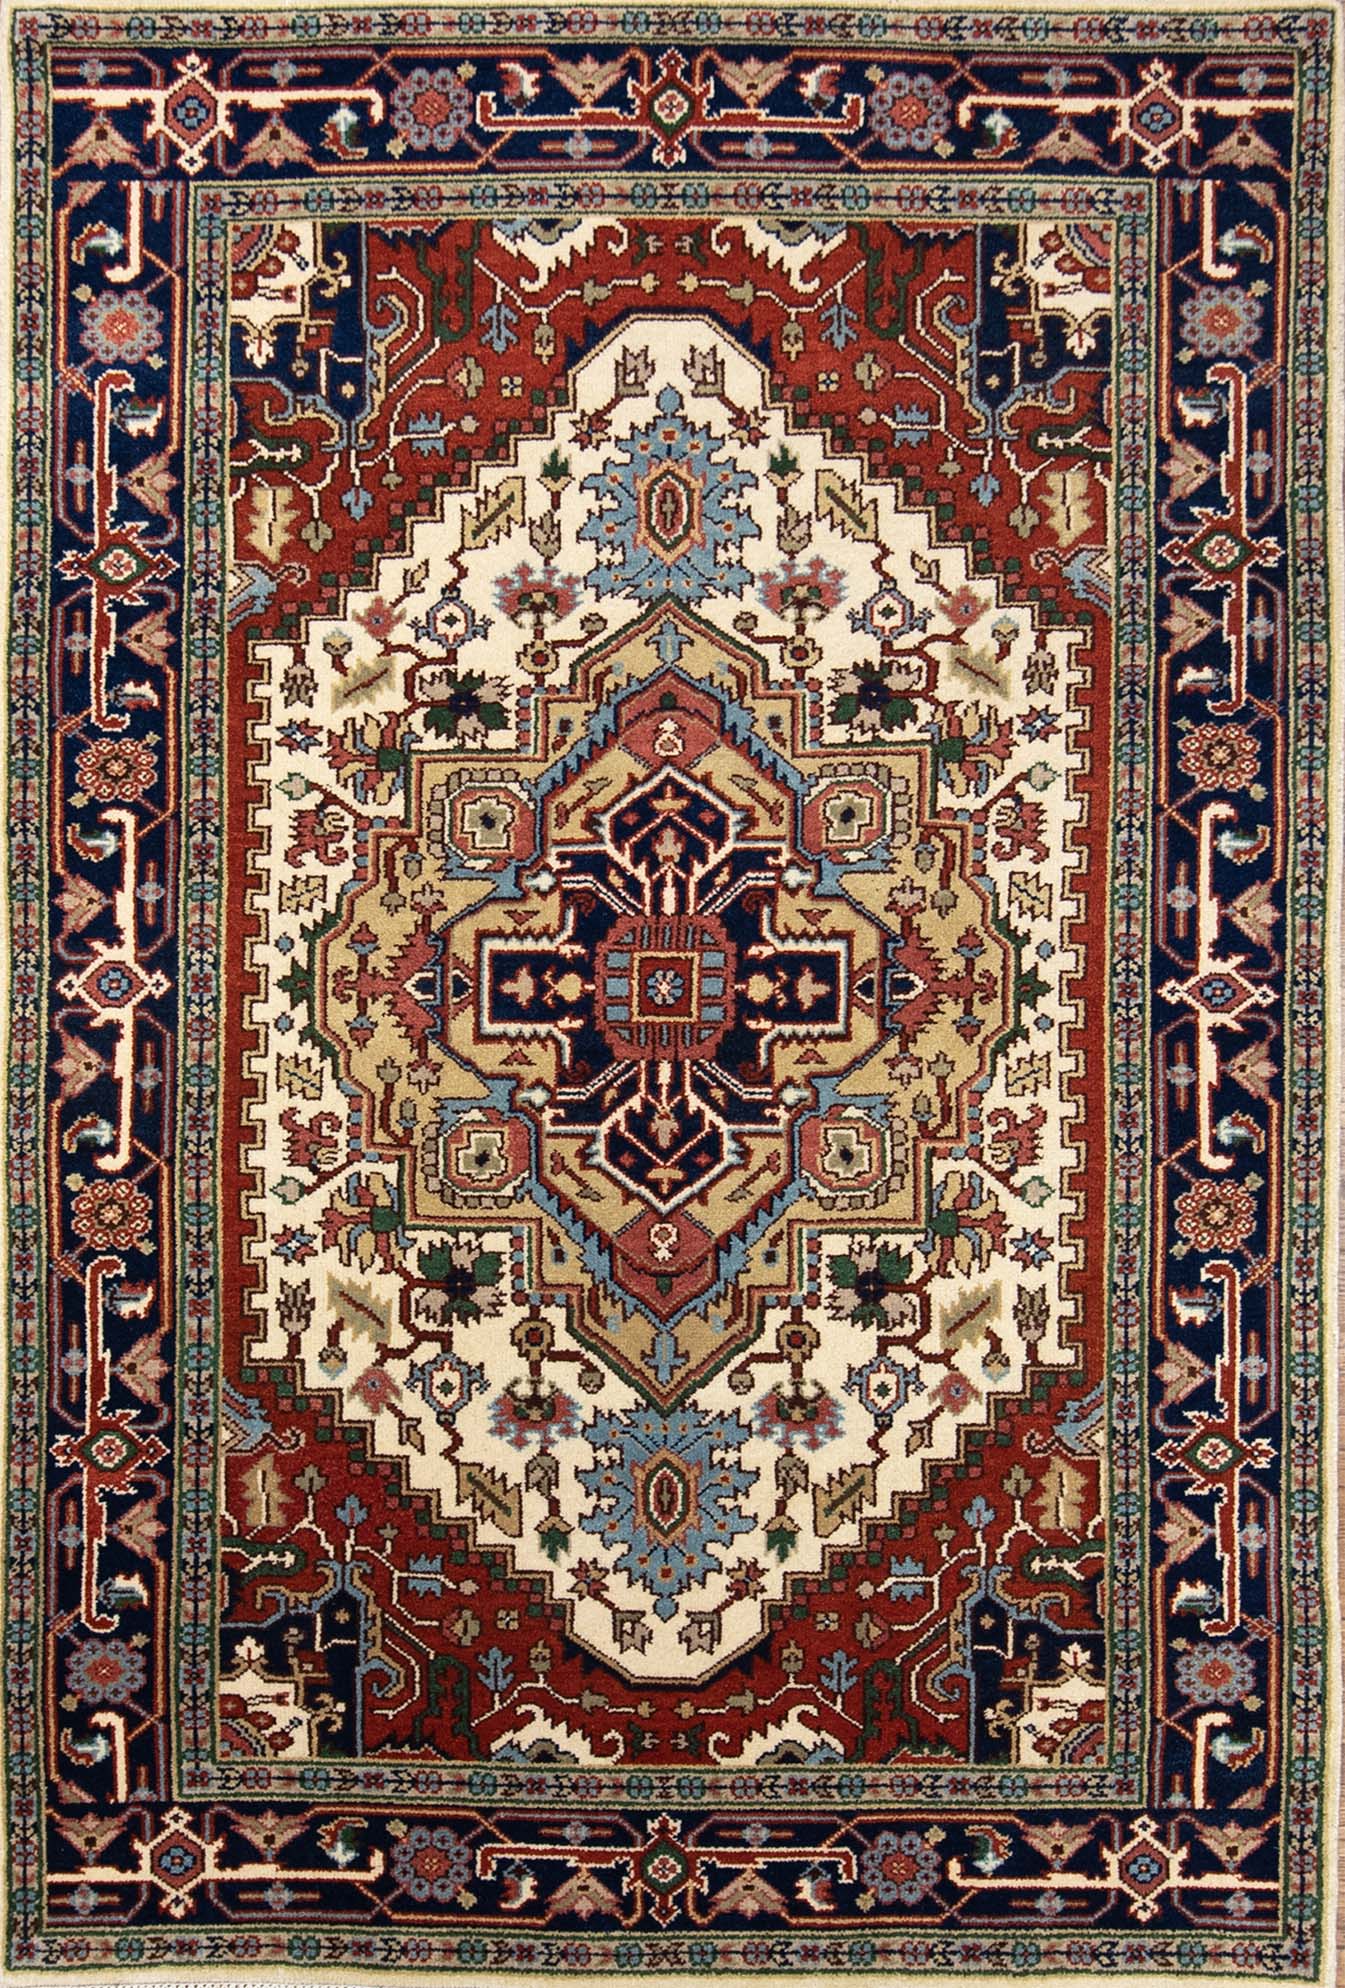 Affordable rugs by Beautiful Rugs Chicago, handmade wool rug in beige and rust colors made in India. Size 5.10x9.3.